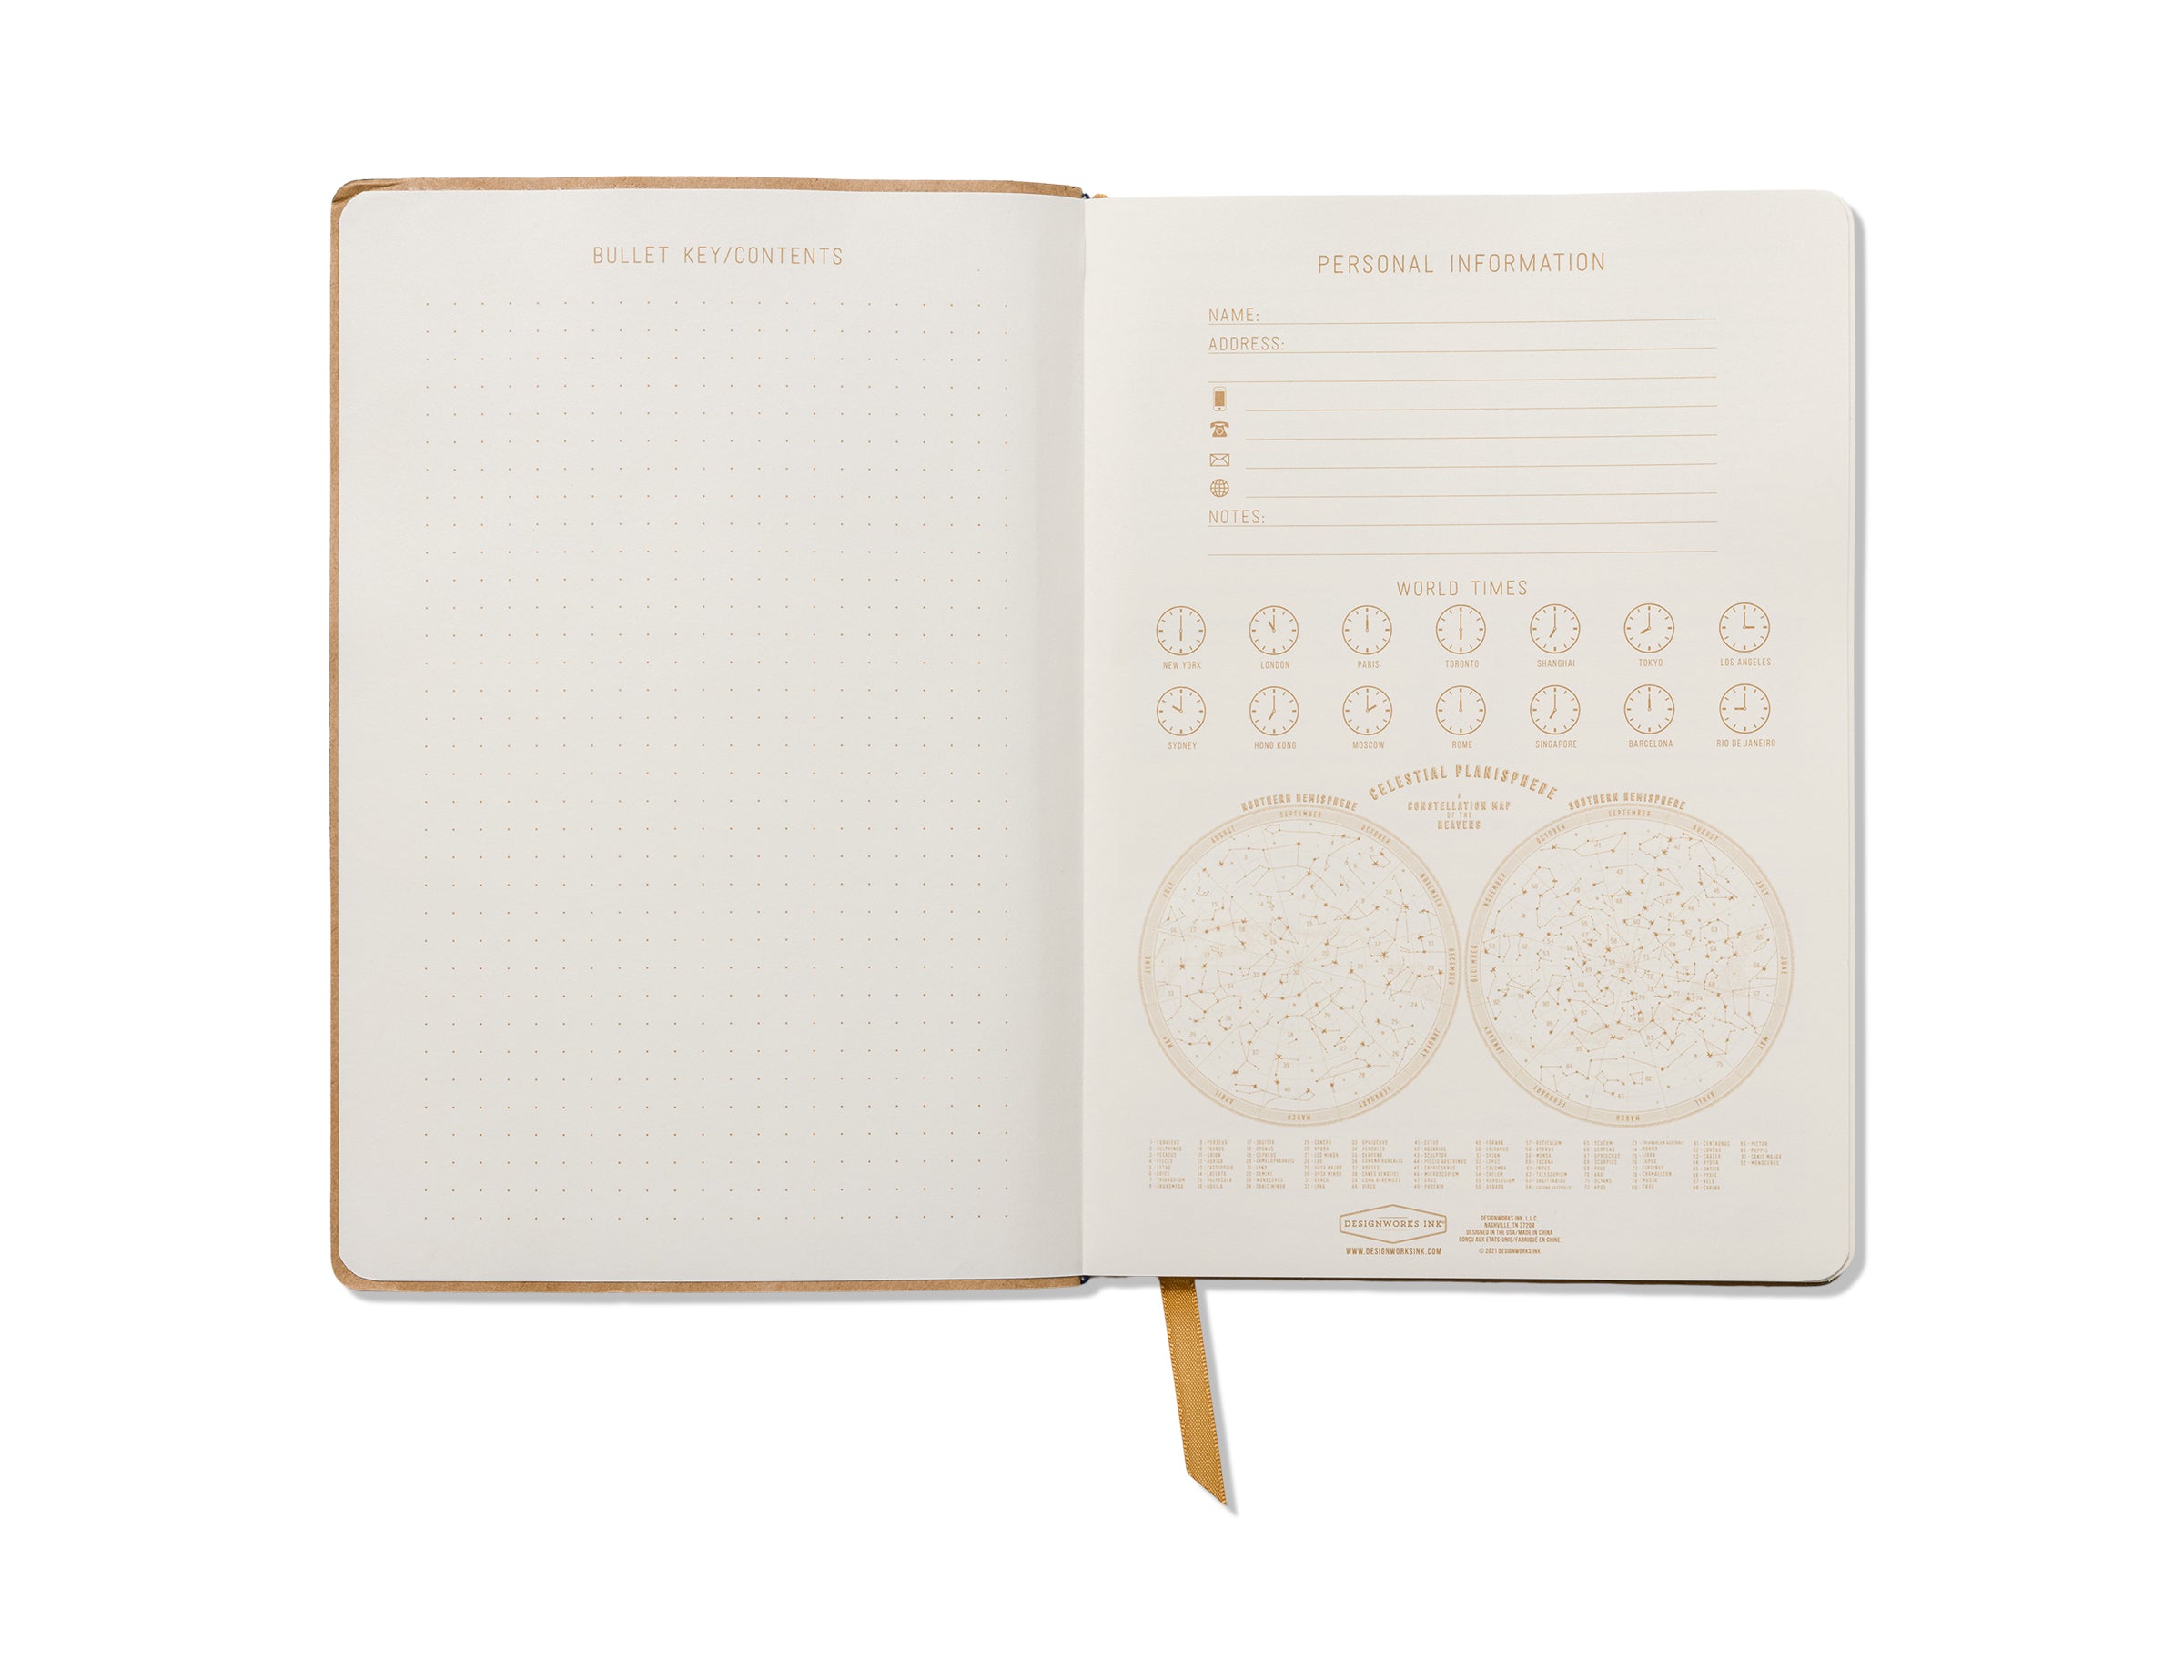 Inside of Soft Mushroom Vegan Suede Journal with 192 lined pages and ribbon bookmark. White background. 